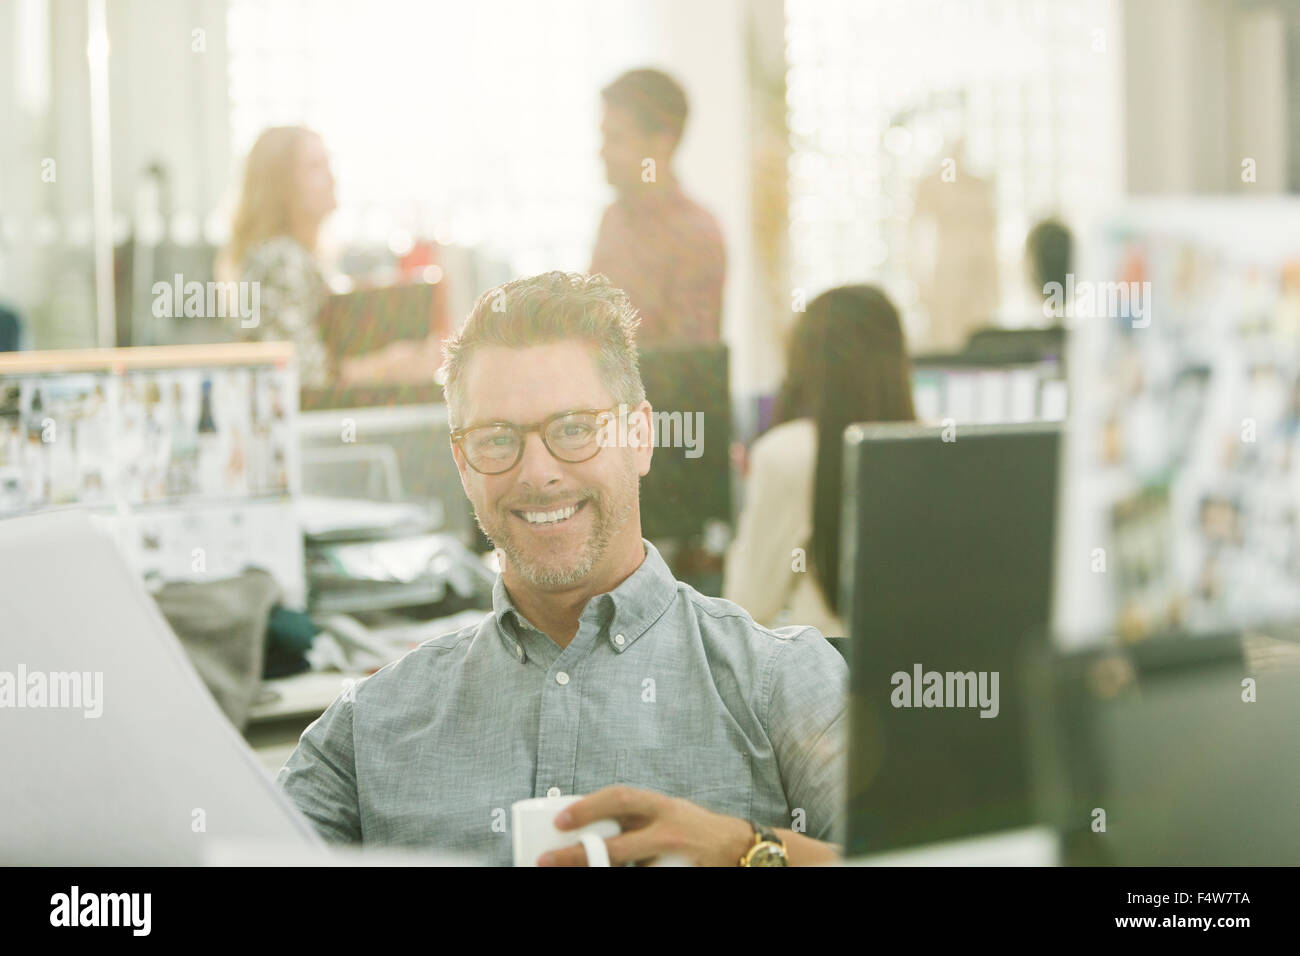 Portrait smiling fashion designer drinking coffee in office Stock Photo